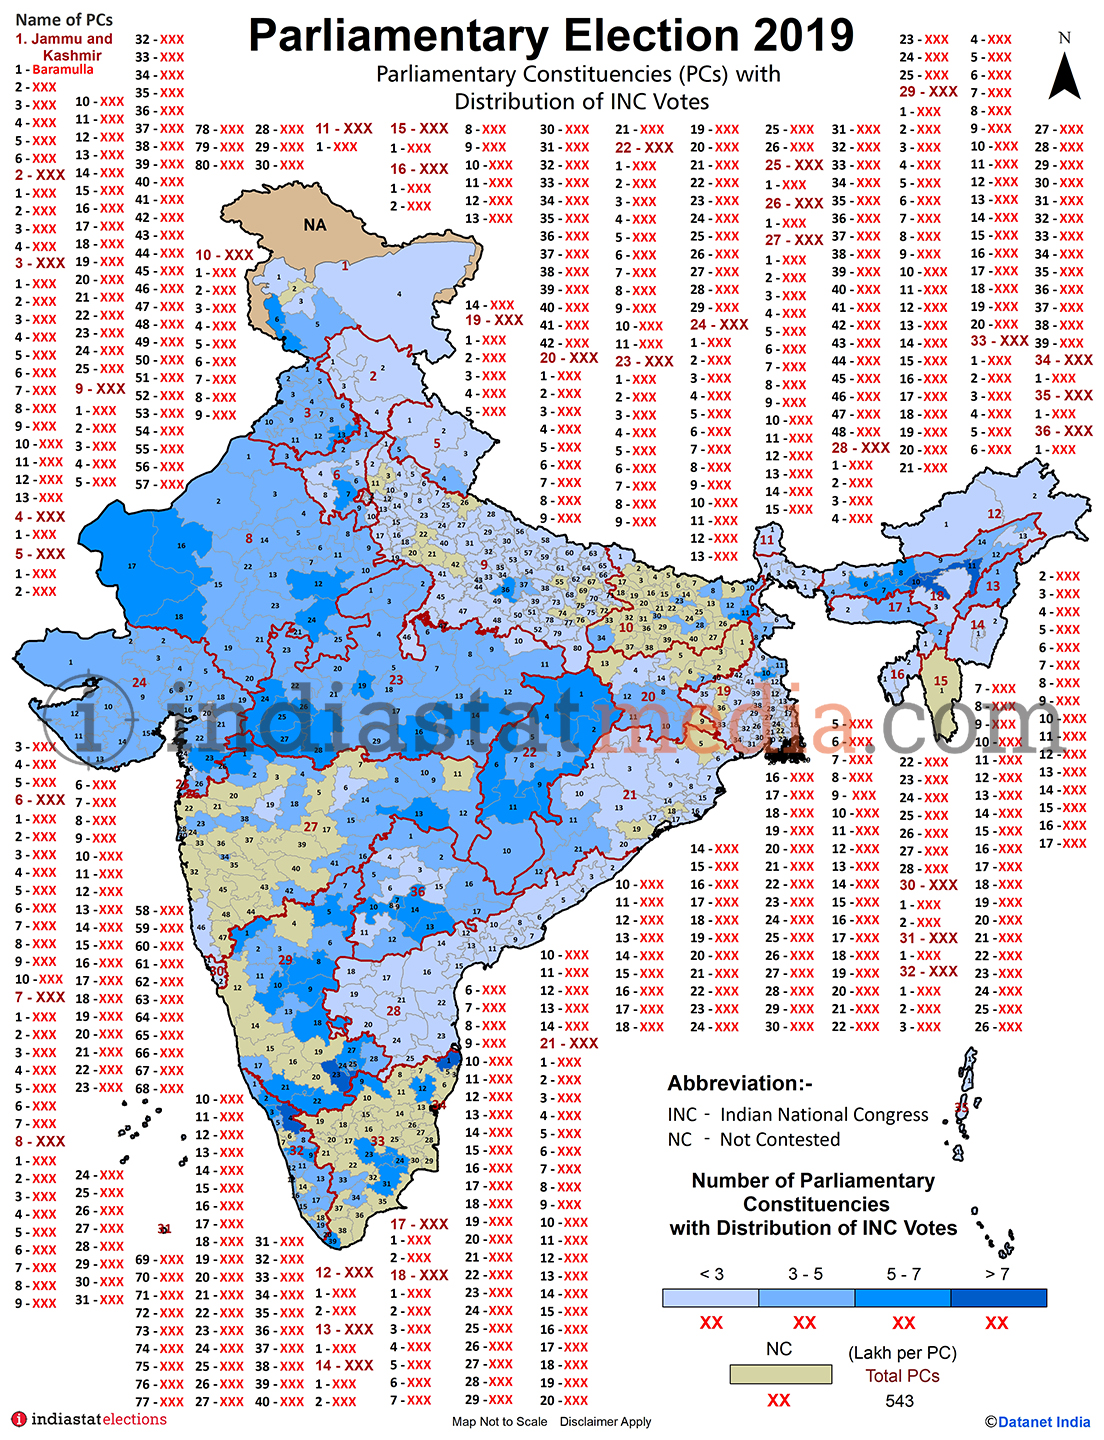 Distribution of INC Votes by Parliamentary Constituencies in India (Parliamentary Election - 2019)